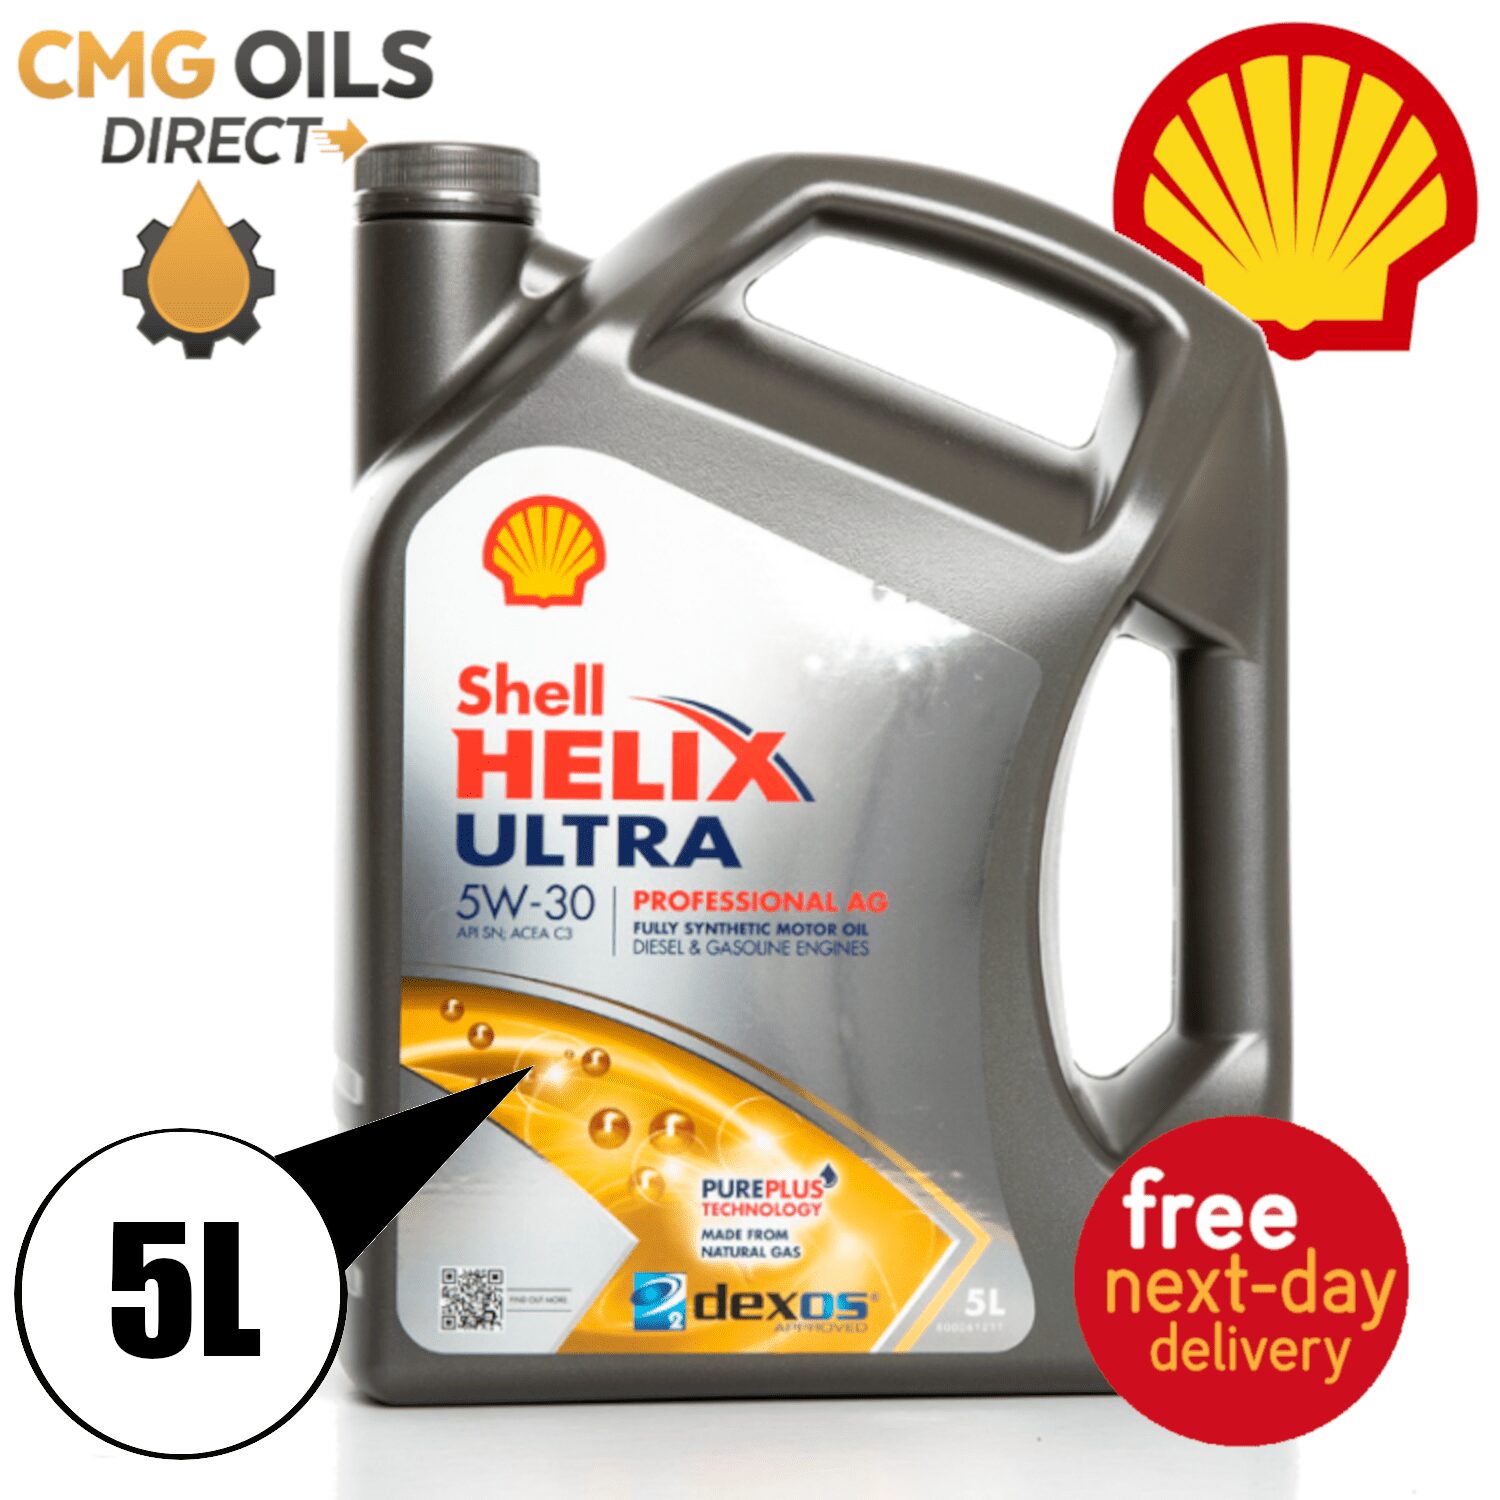 SHELL HELIX ULTRA PROFESSIONAL 5w30 AG FULLY SYNTHETIC MOTOR OIL 5L .